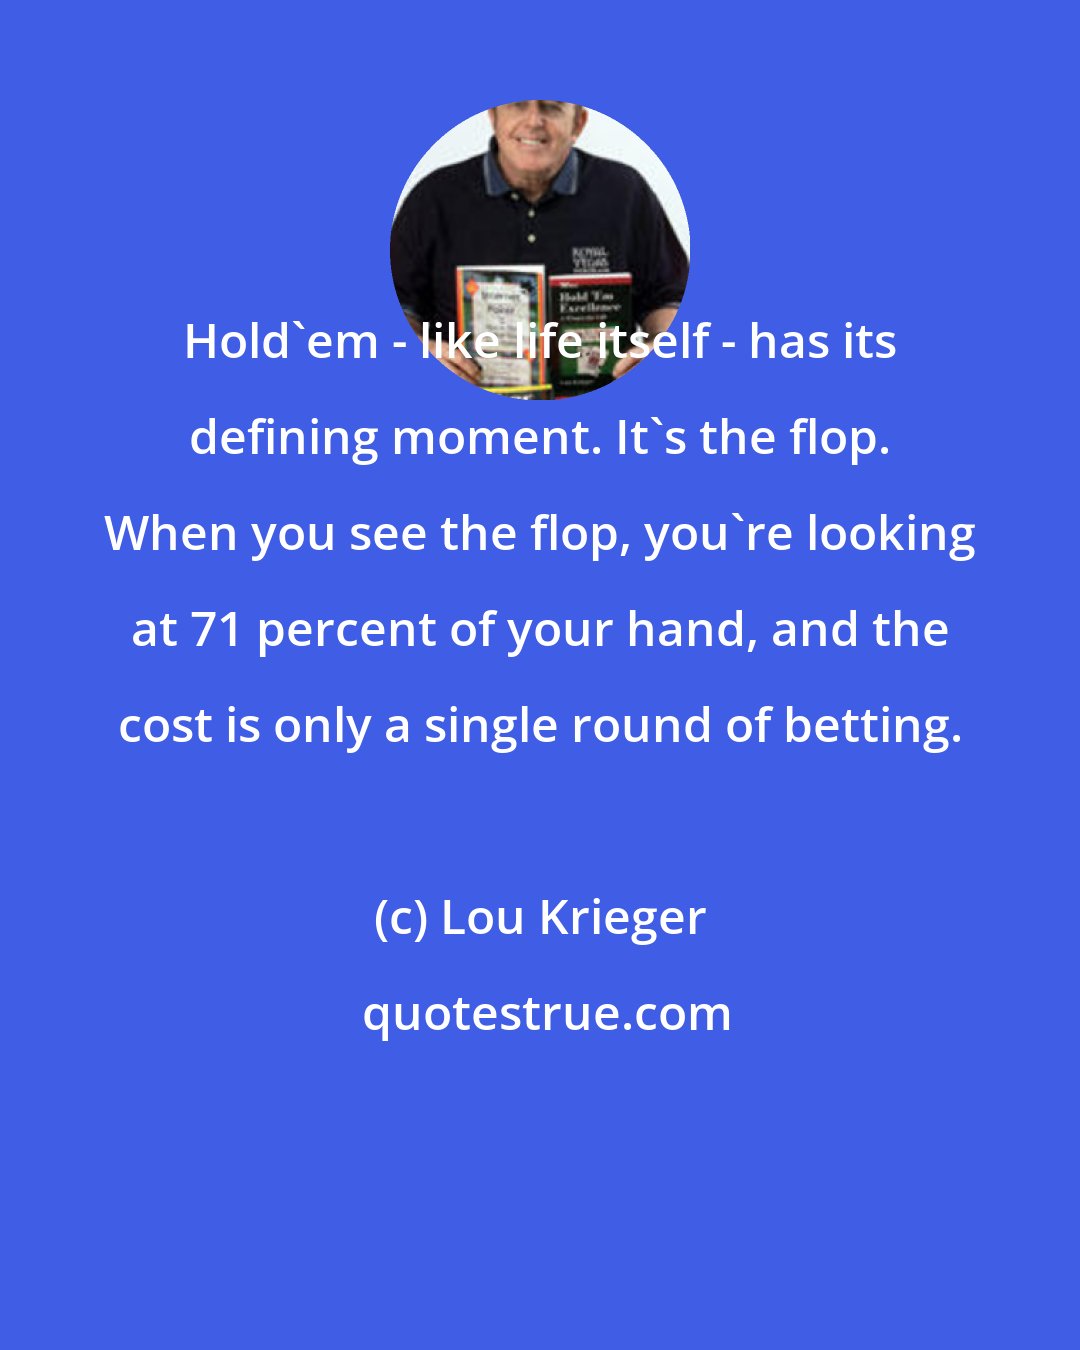 Lou Krieger: Hold'em - like life itself - has its defining moment. It's the flop. When you see the flop, you're looking at 71 percent of your hand, and the cost is only a single round of betting.